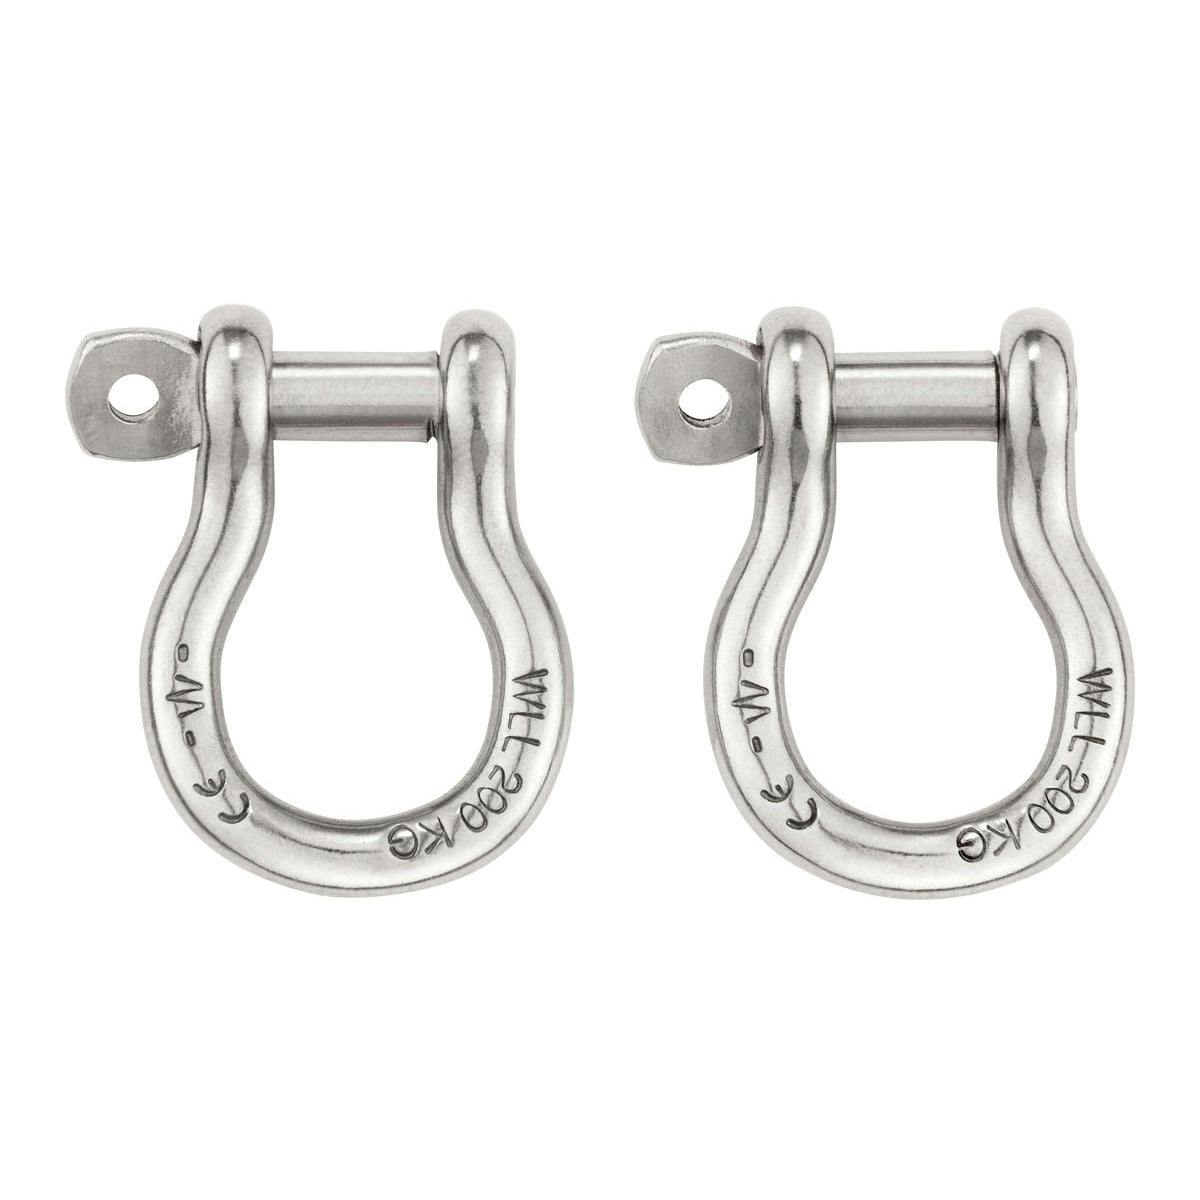 Petzl 2 Shackles For Astro Harness_0